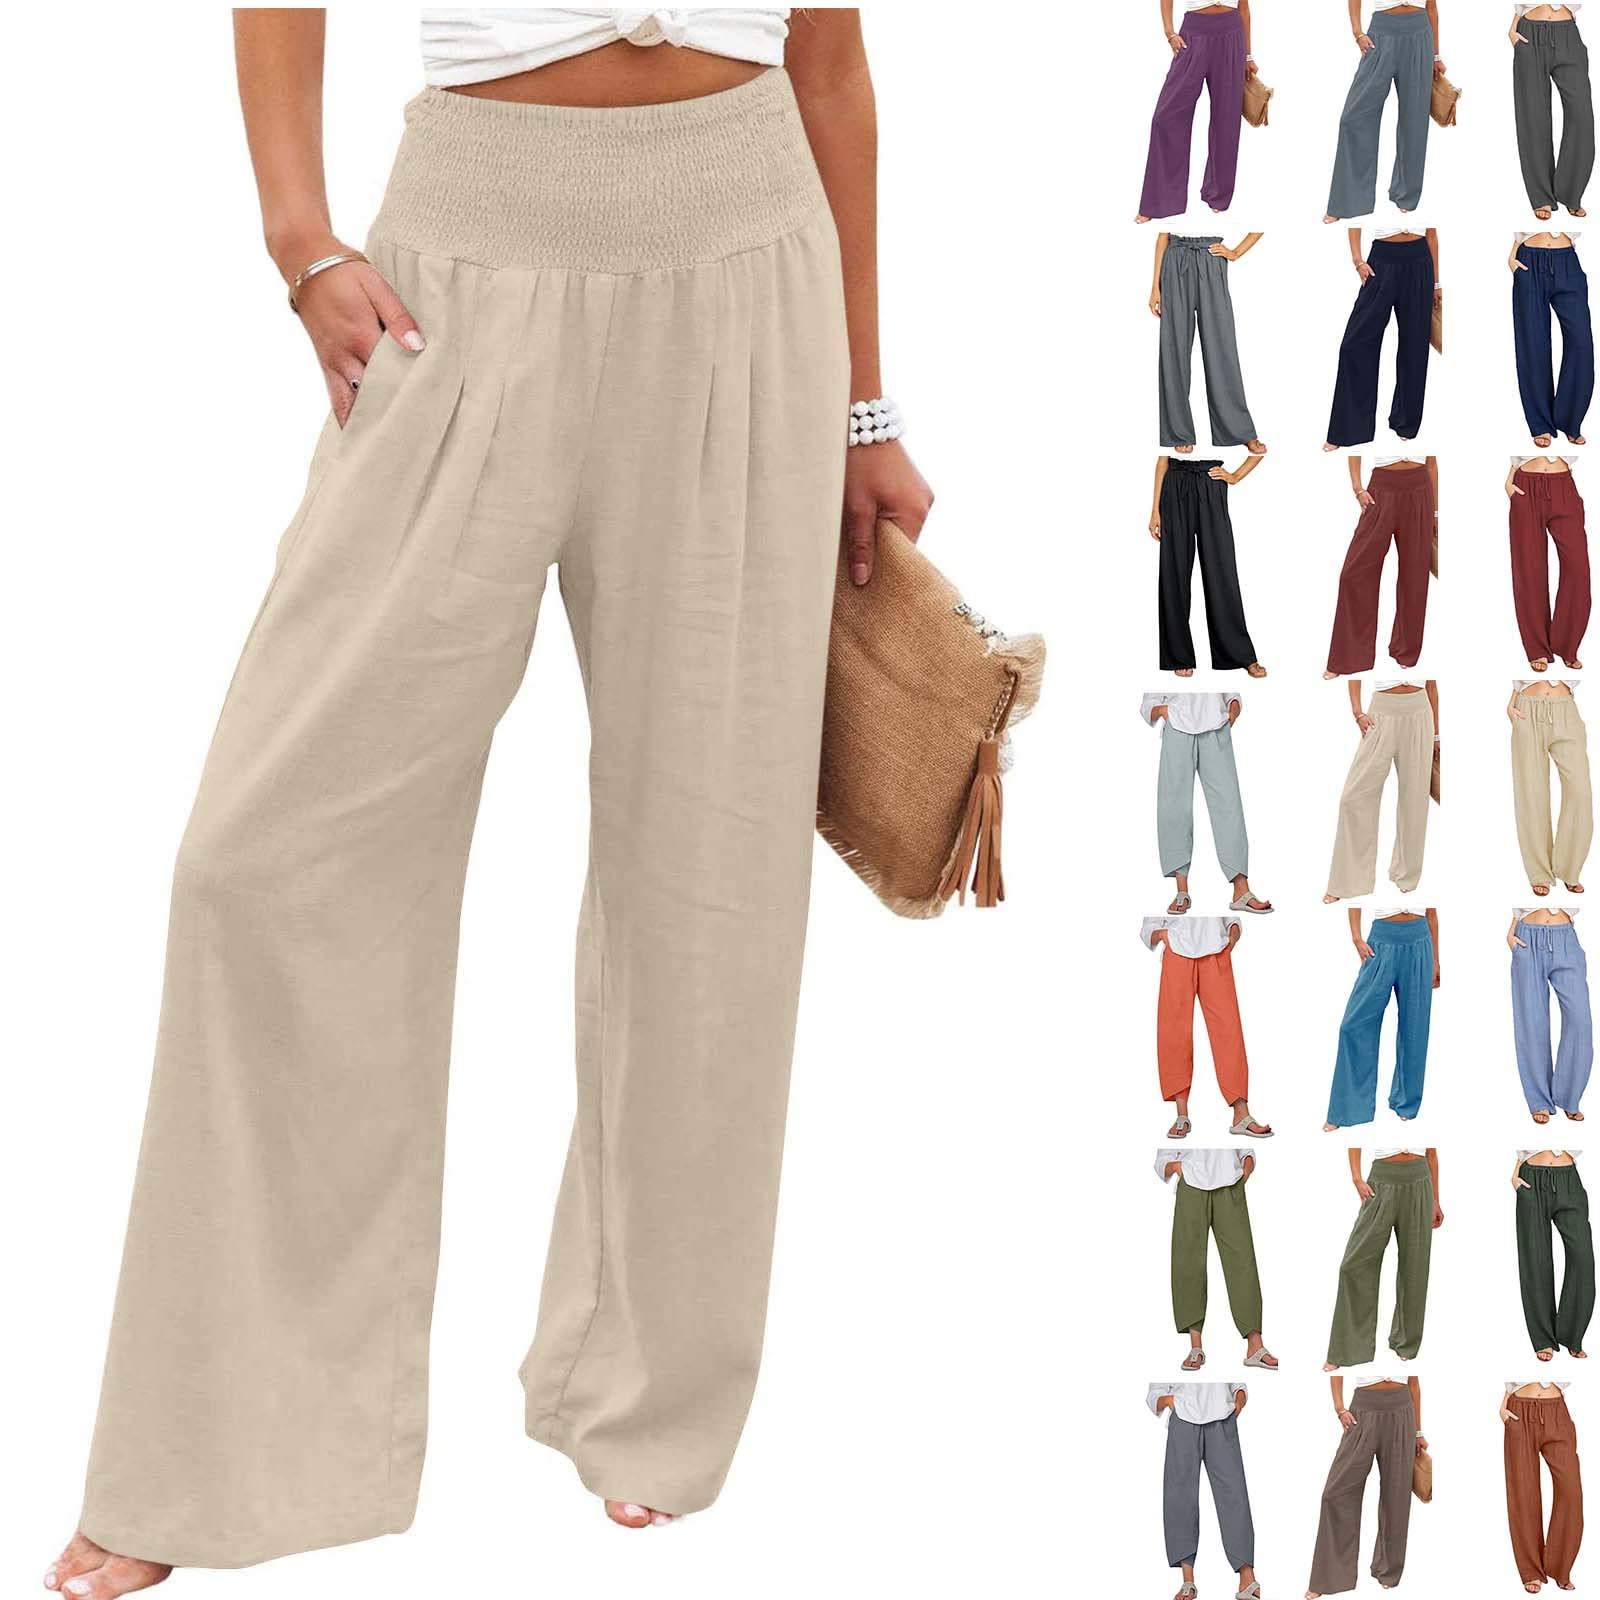 JEGULV Linen Pants for Women Casual Summer High Waist Wide Leg Palazzo  Lounge Pants Solid Baggy Pant Trousers with Pocket D01#khaki Small